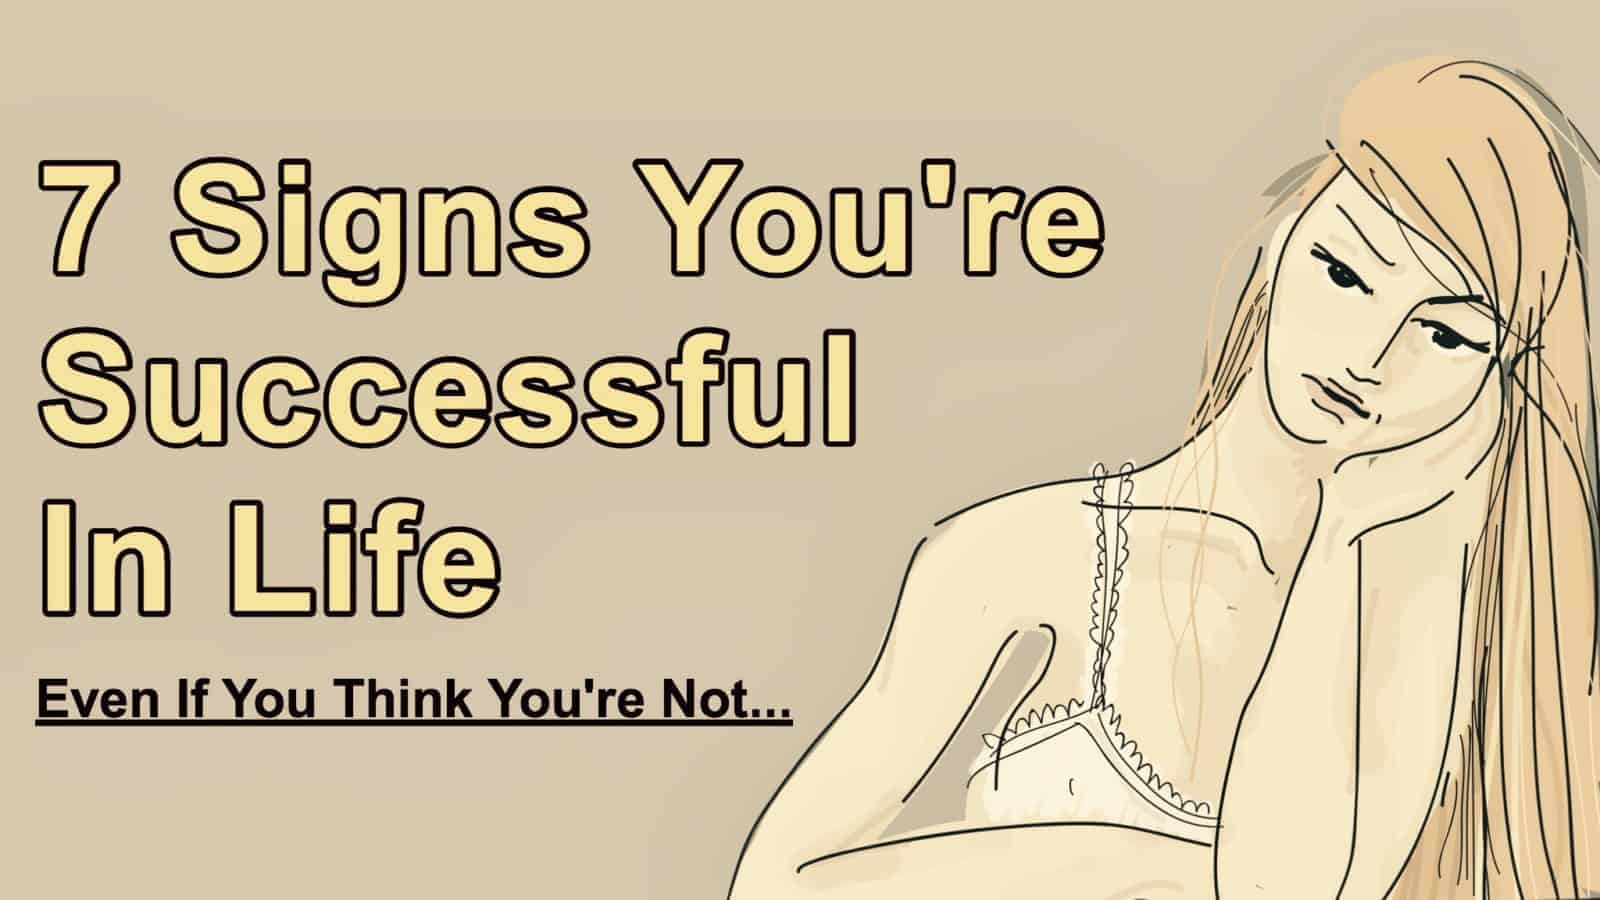 7 Signs You’re Successful In Life (Even If You Think You’re Not)